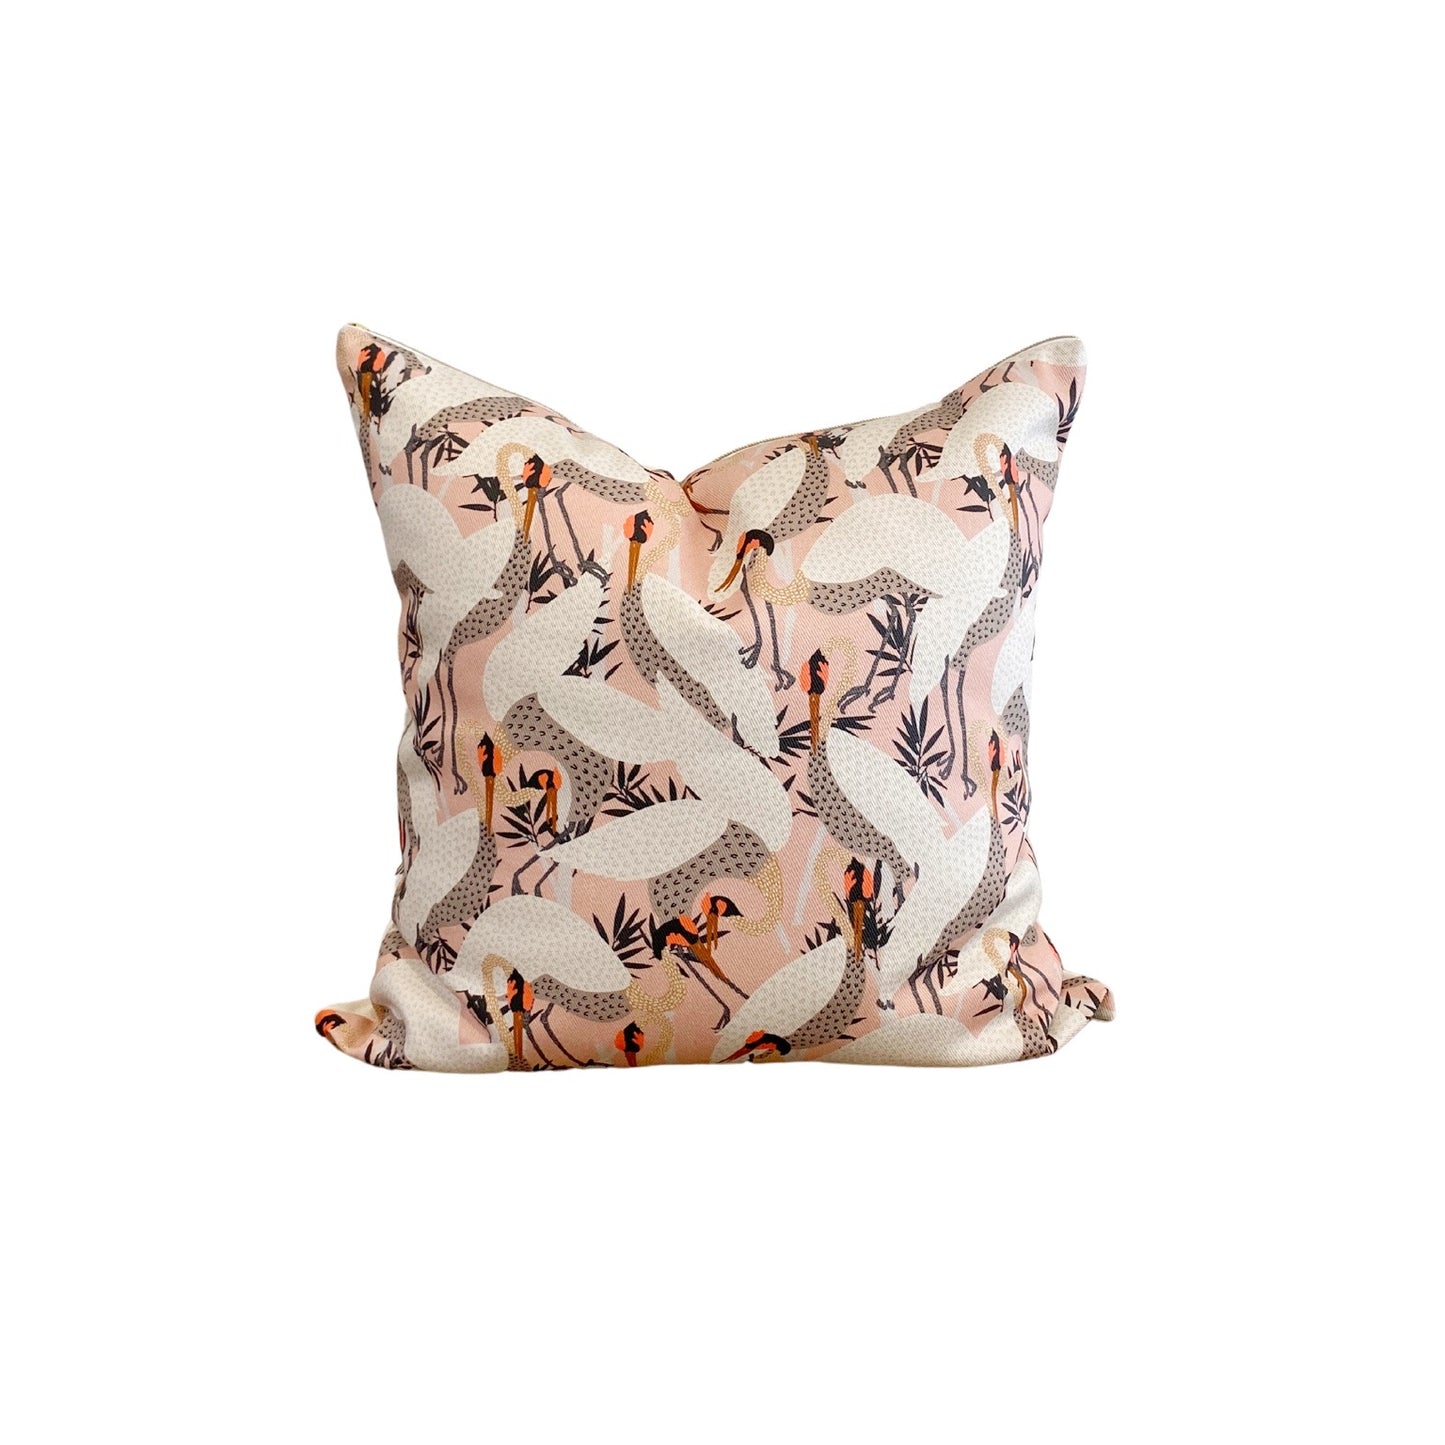 Vintage Herons Pillow Cover - Designed by Holli Zollinger